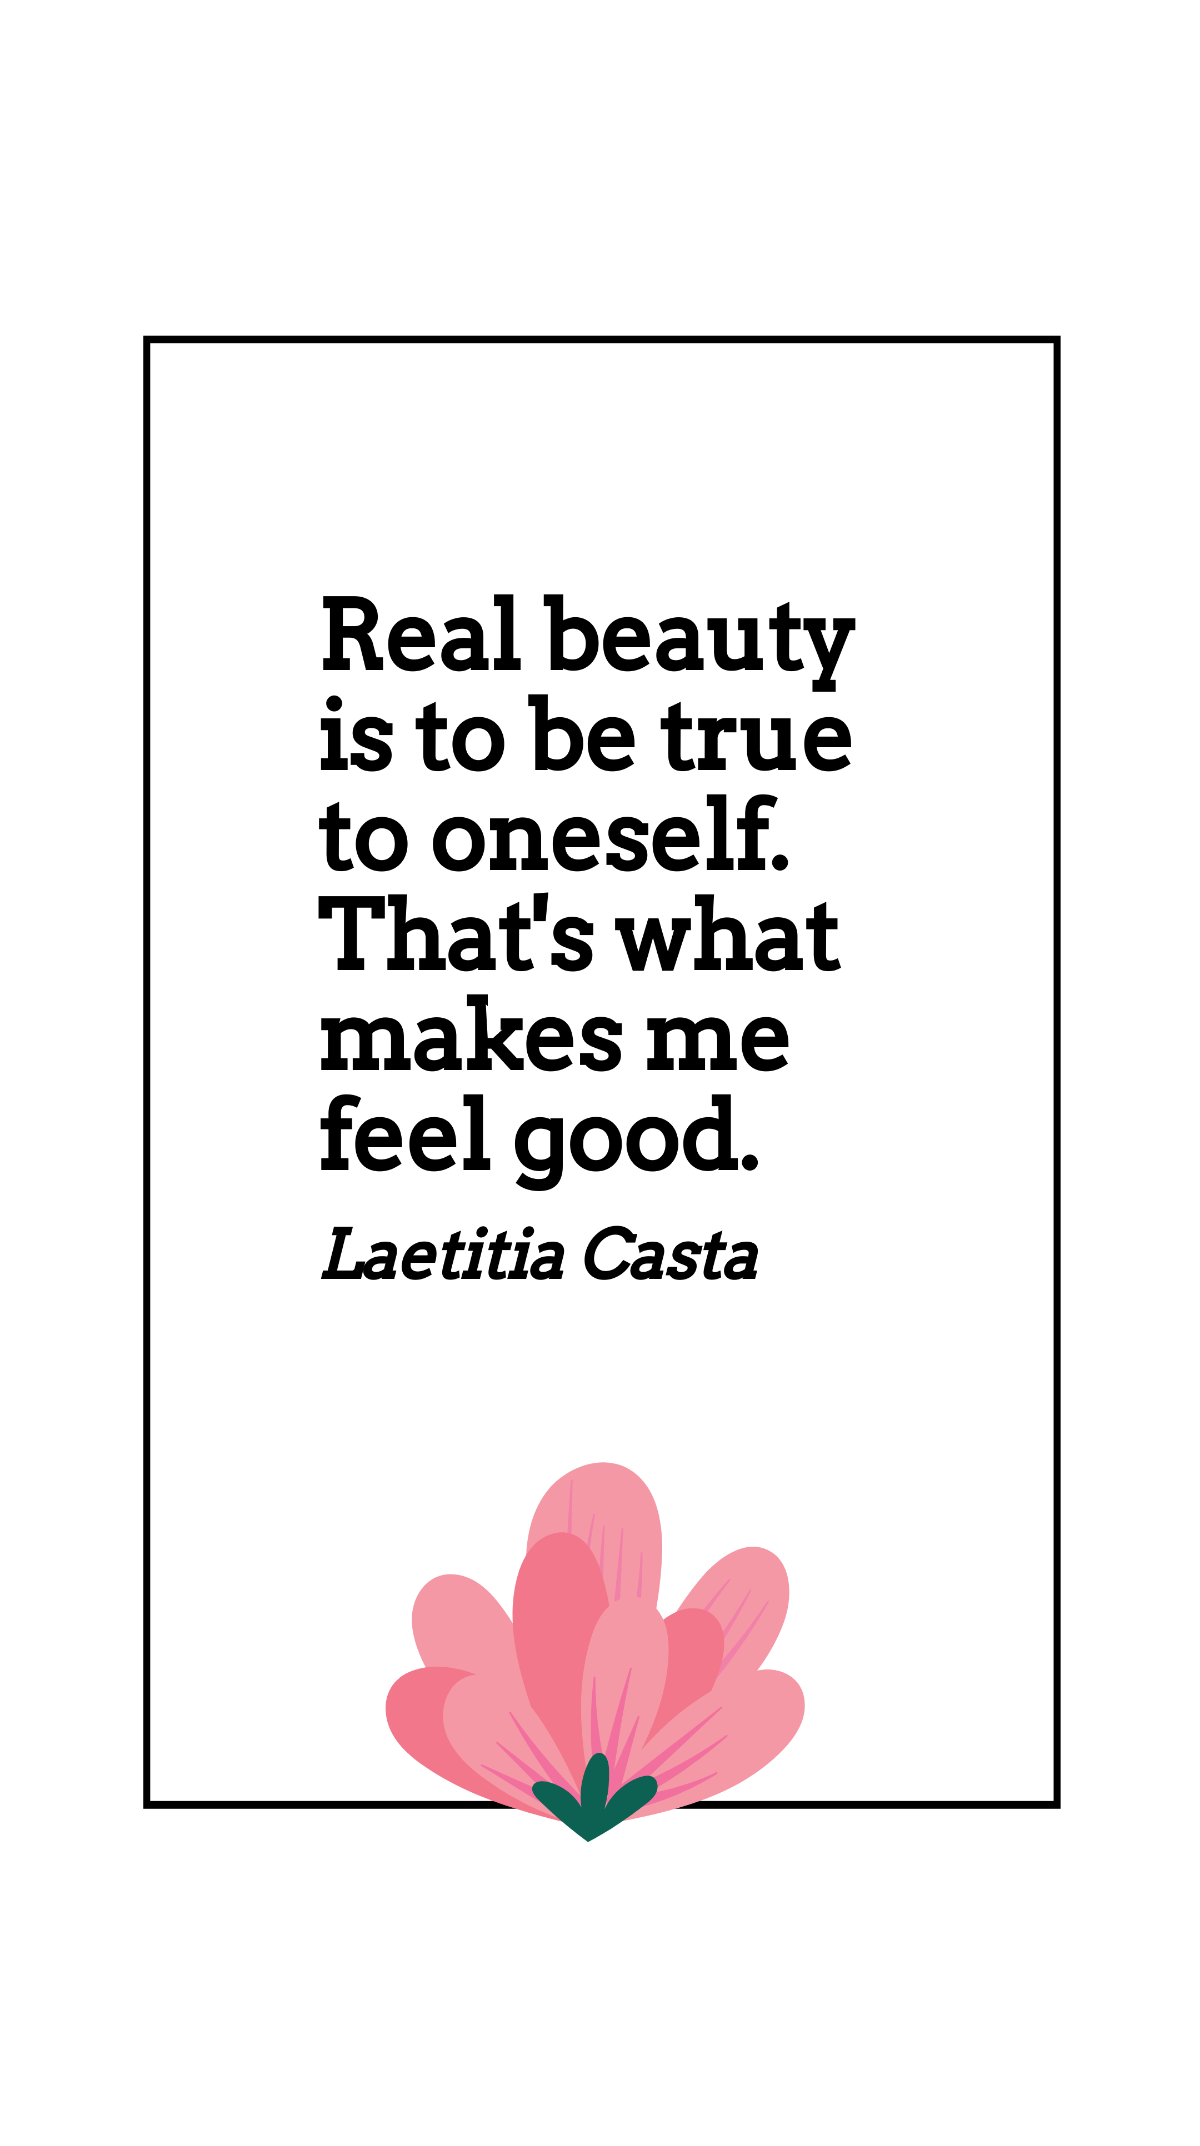 Laetitia Casta - Real beauty is to be true to oneself. That's what makes me feel good.